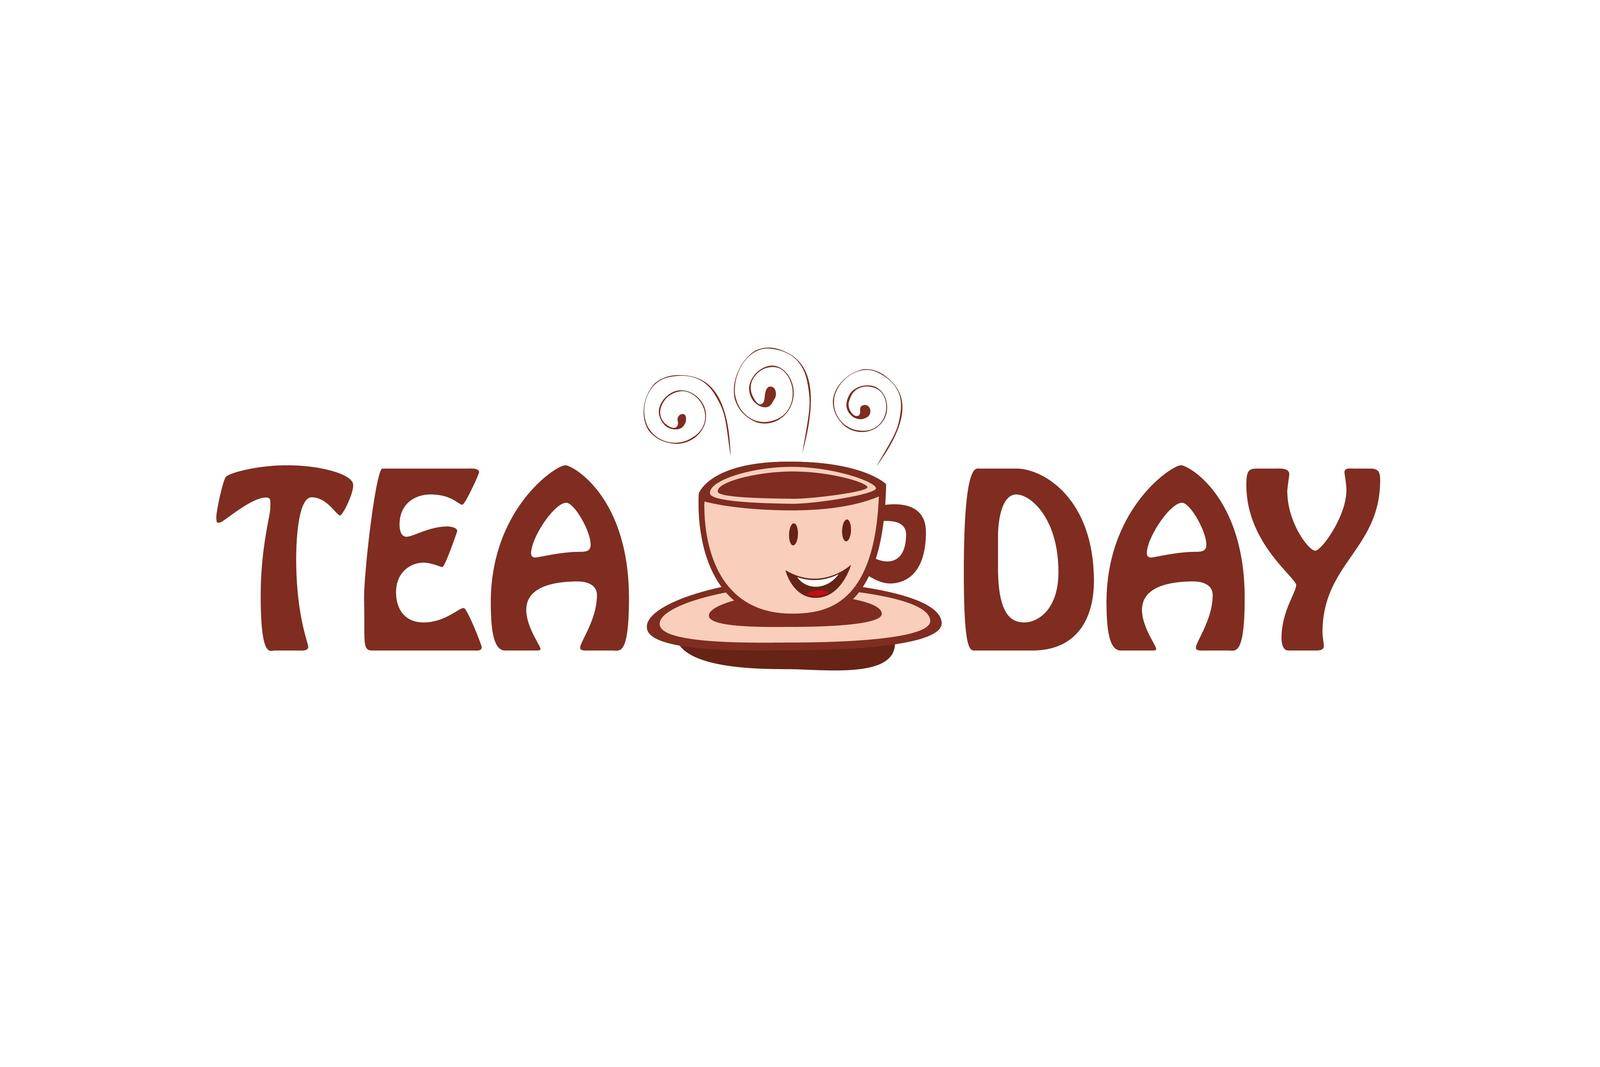 World tea day design. Vector illustration of smiling cup with tea and text Tea Day